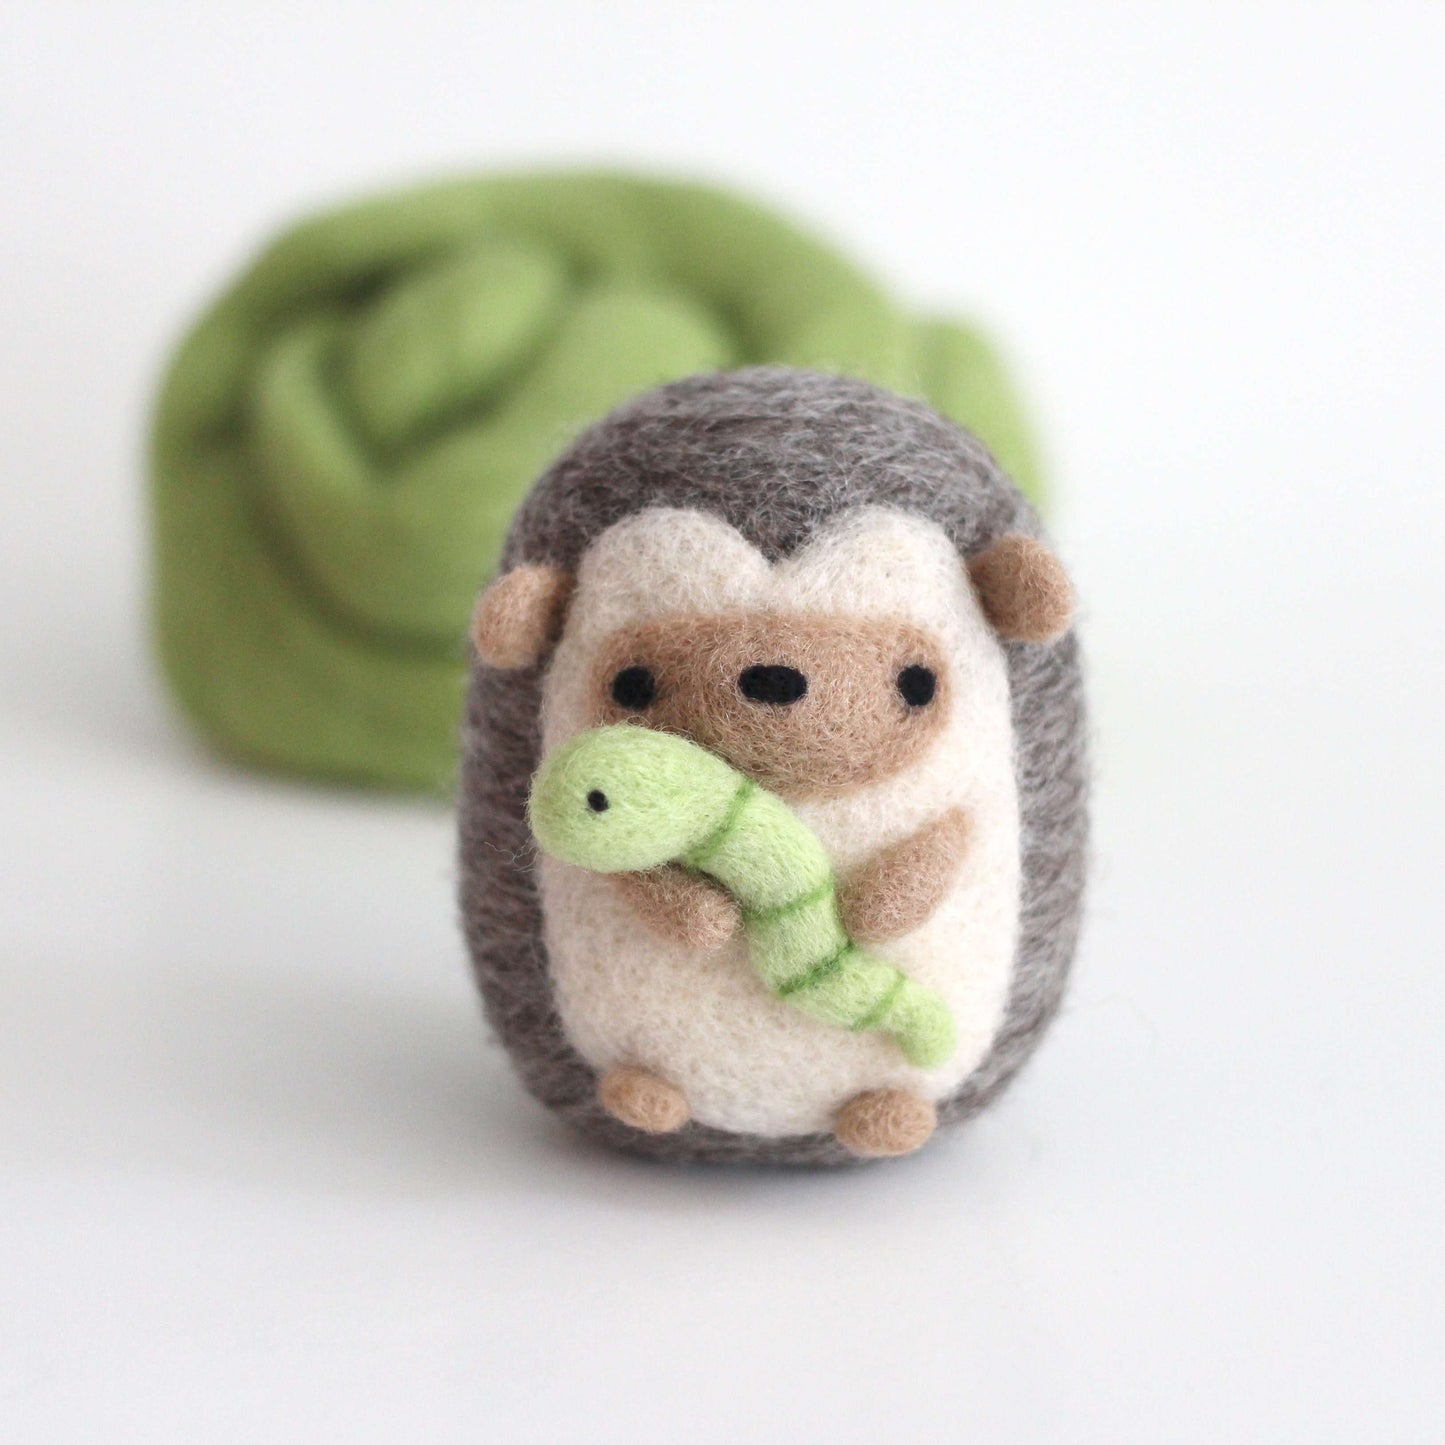 Needle Felted Hedgehog holding Worm by Wild Whimsy Woolies